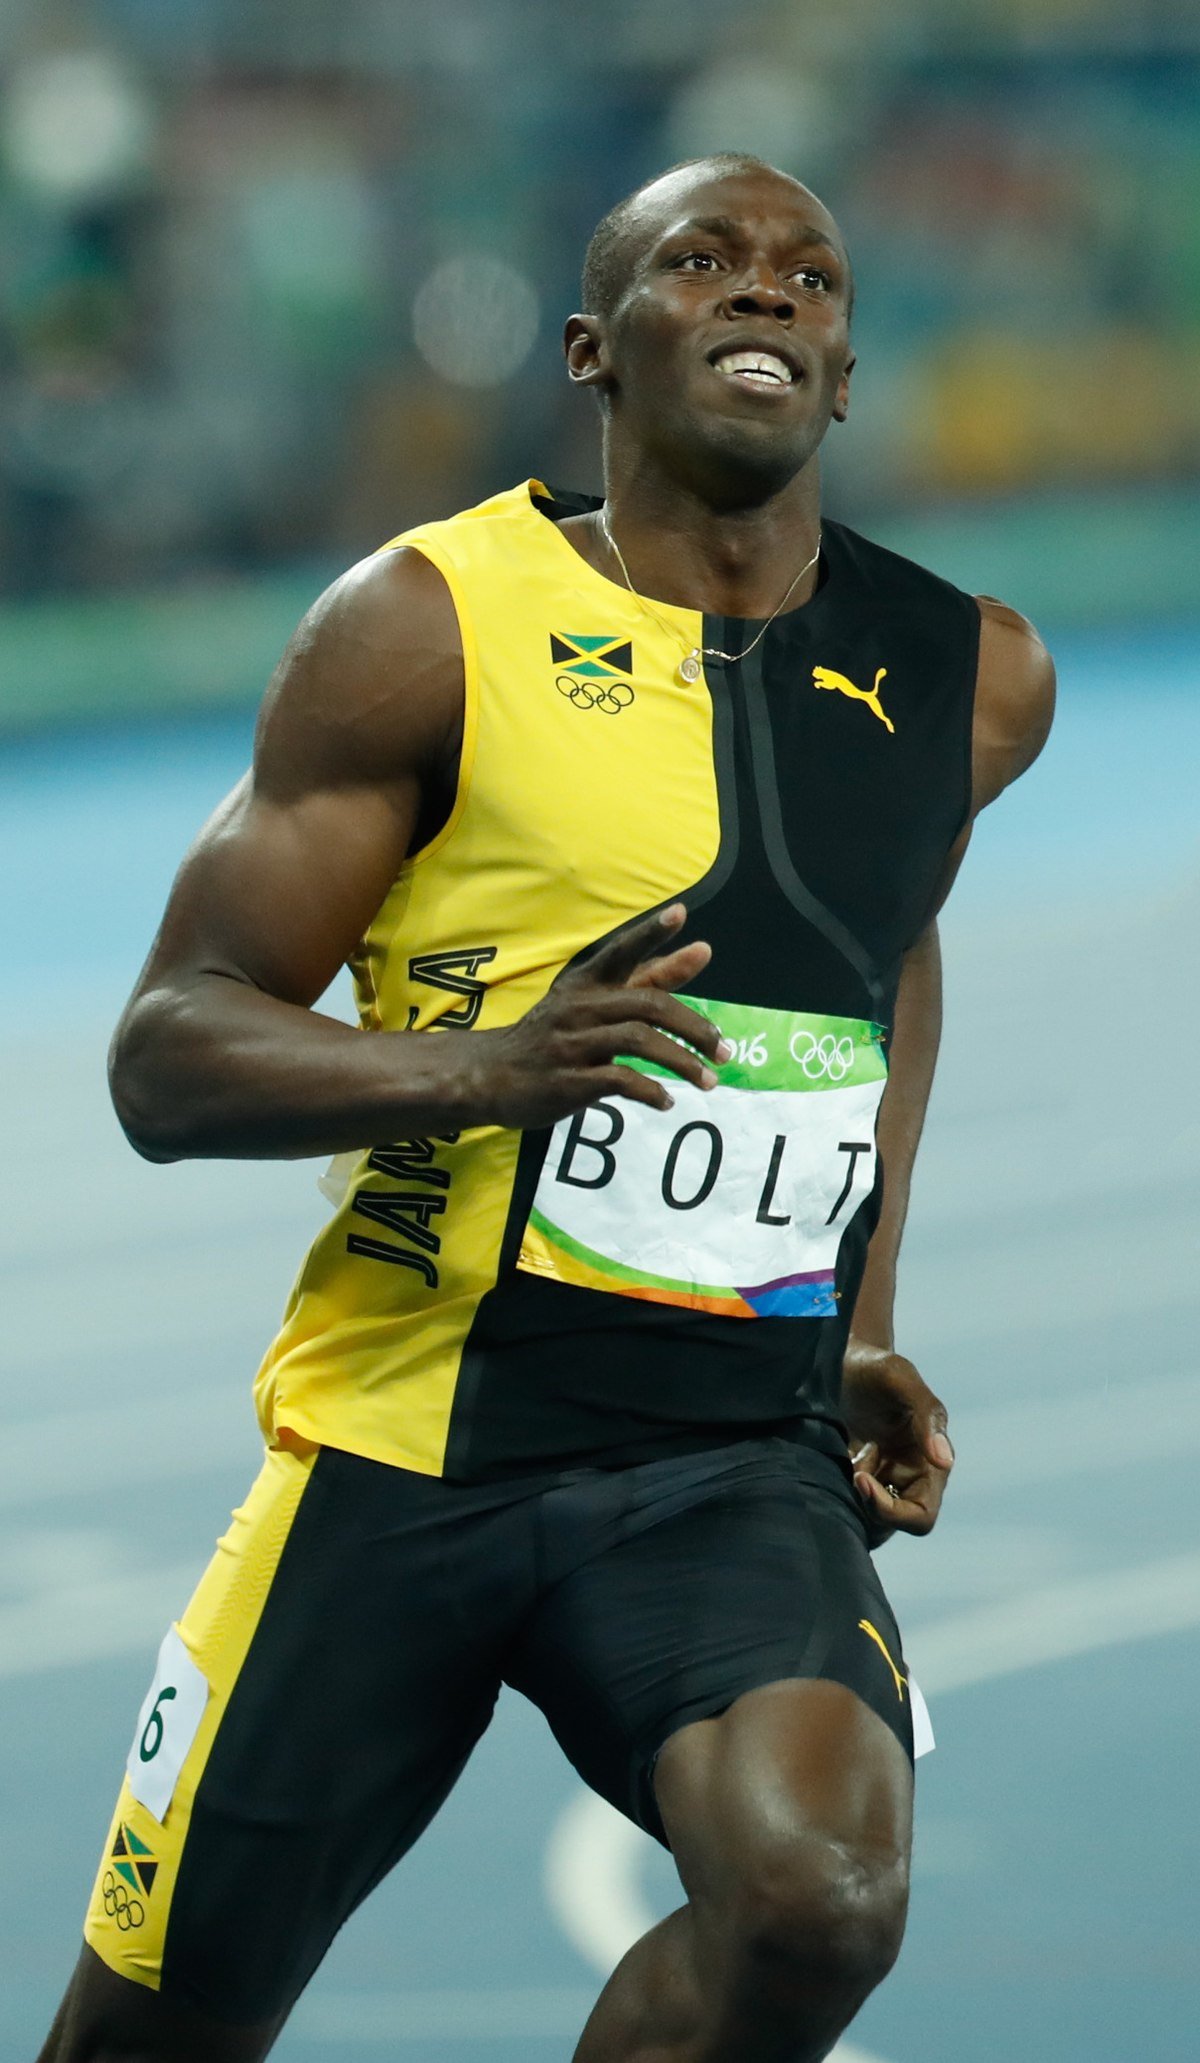 How fast is Usain Bolt compared to the worlds fastest animals and machines?